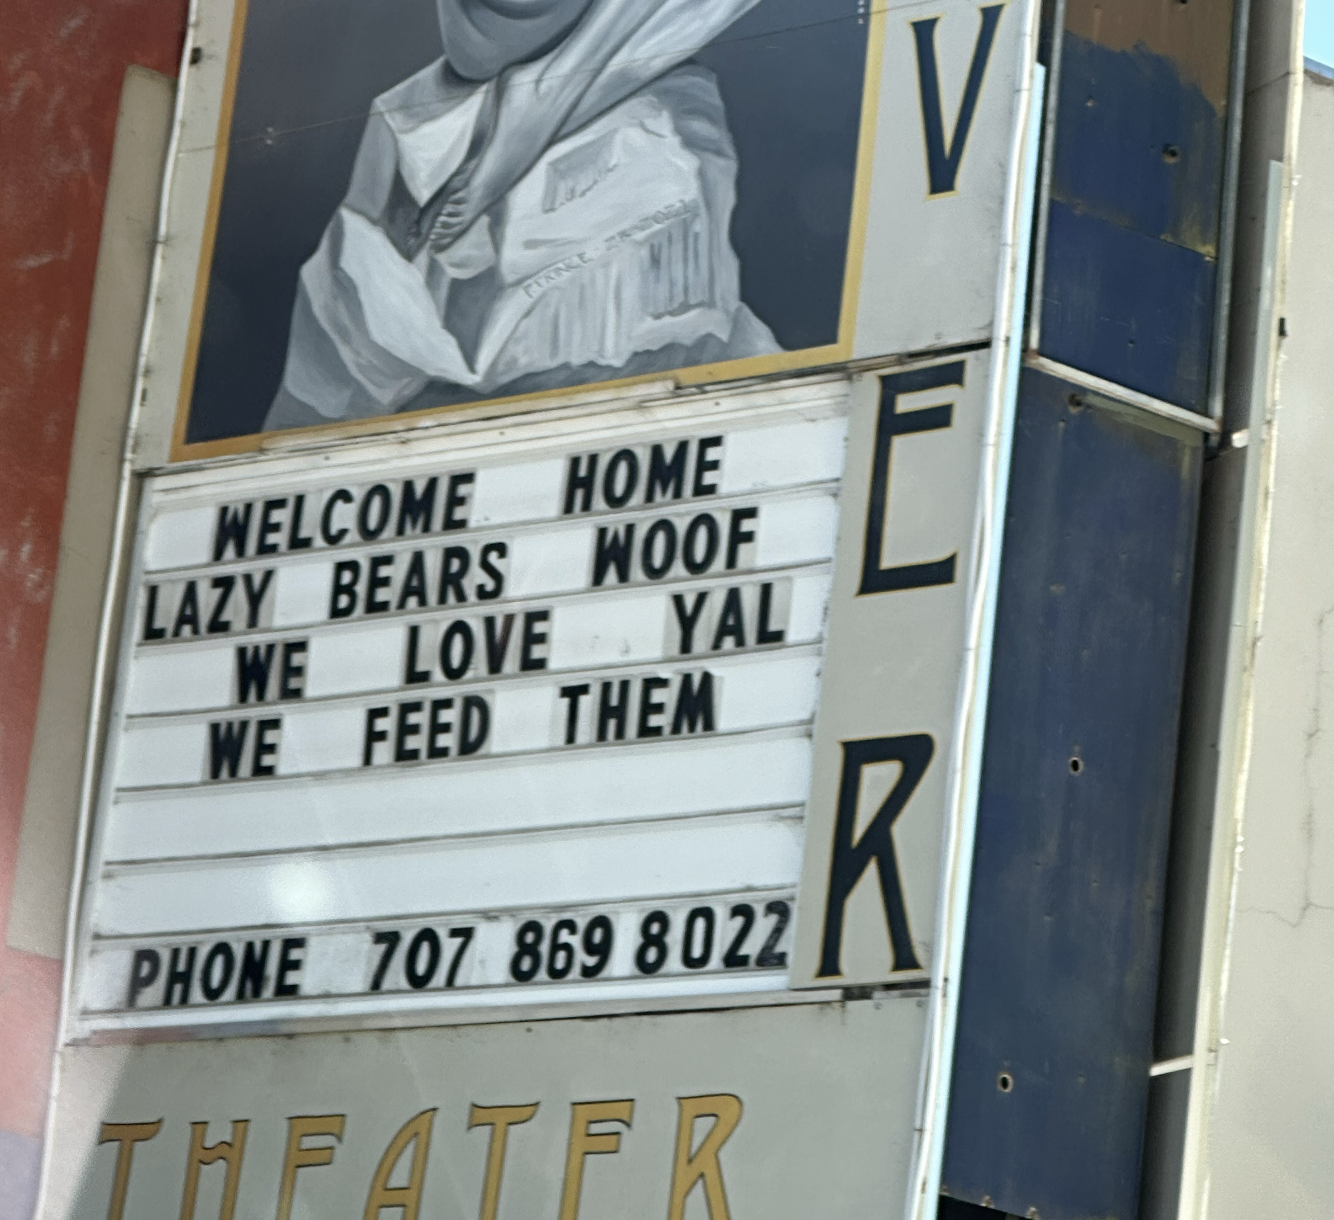 marquee sign that reads welcome home lazy bears woof we love yal we feed them